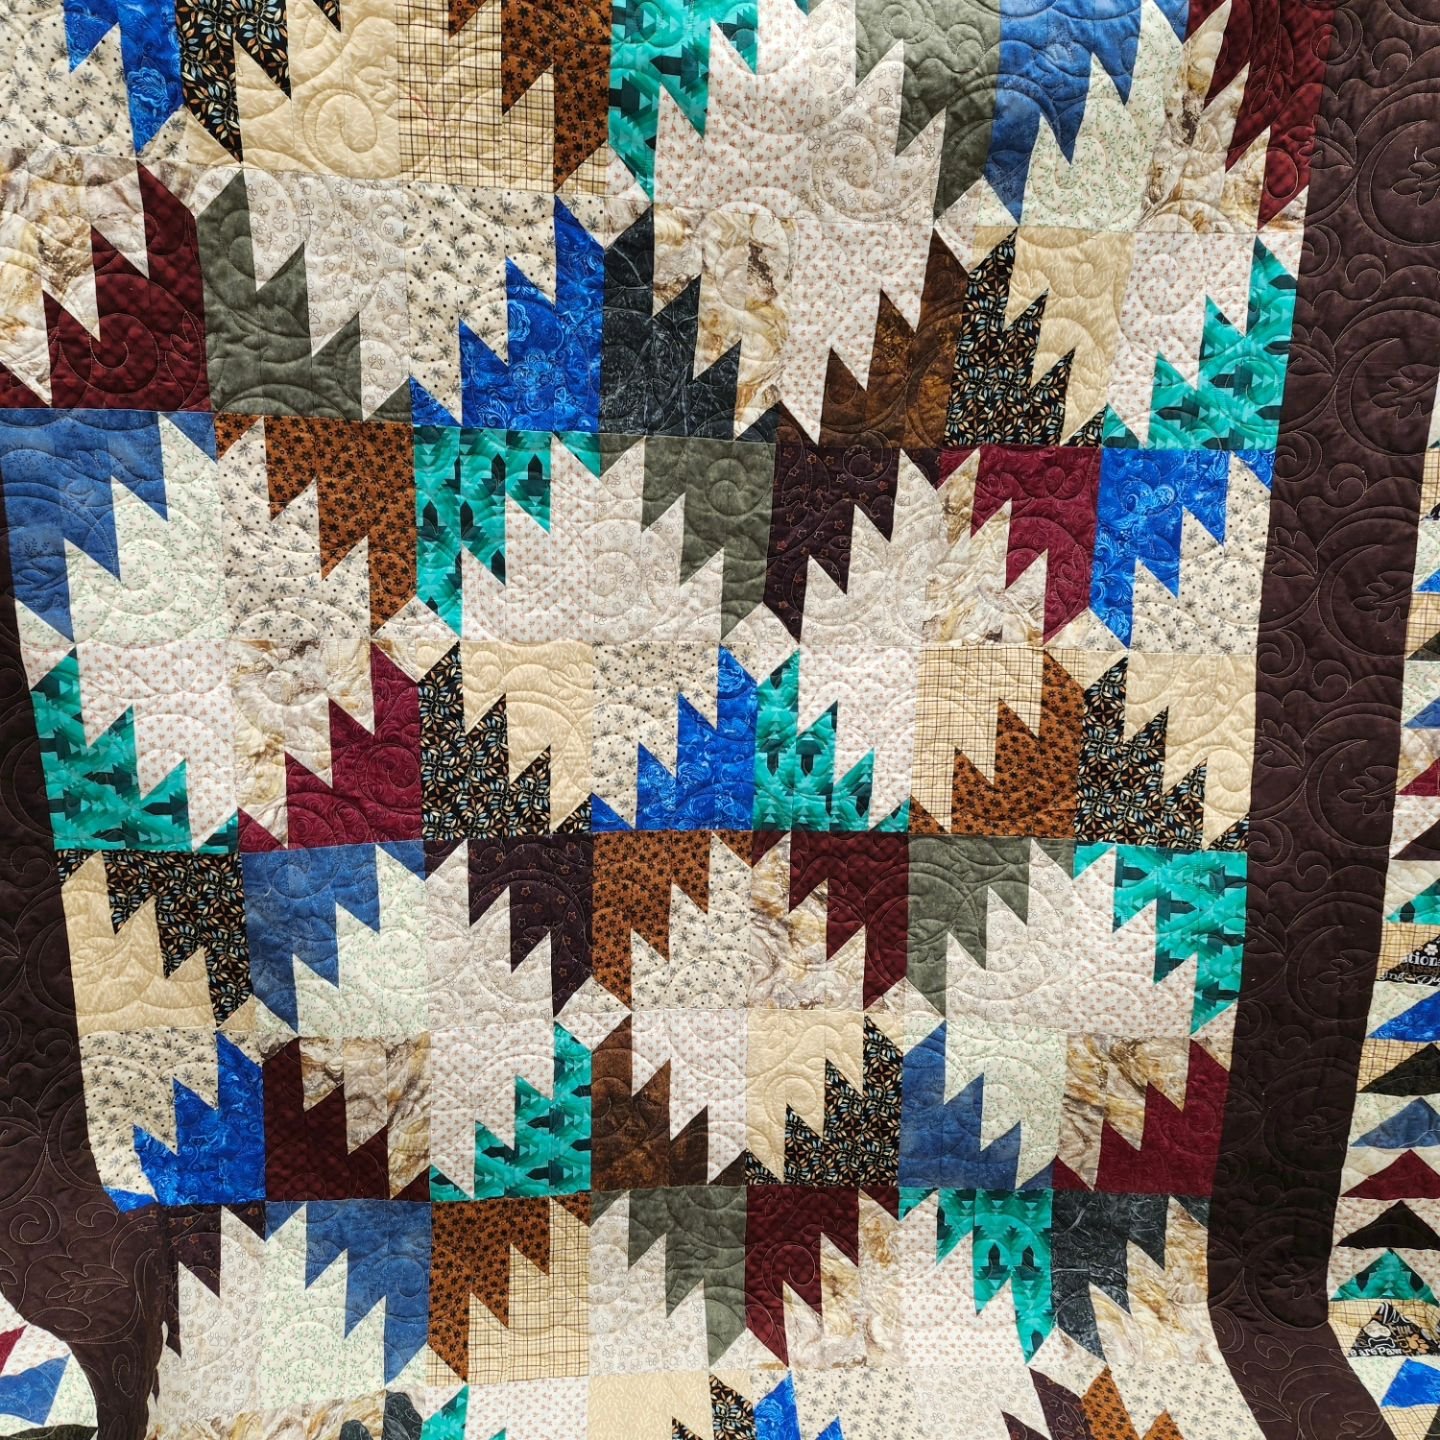 Jill was in today to longarm this awesome Delectable Mountain quilt.  She chose a pattern called 'leaves-in-the-wind' to finish it  ##longarmmachinerentals ##quiltfun ##quiltyourselfawesome ##quilting ##gammillstatlerstitcher ##topstitchery